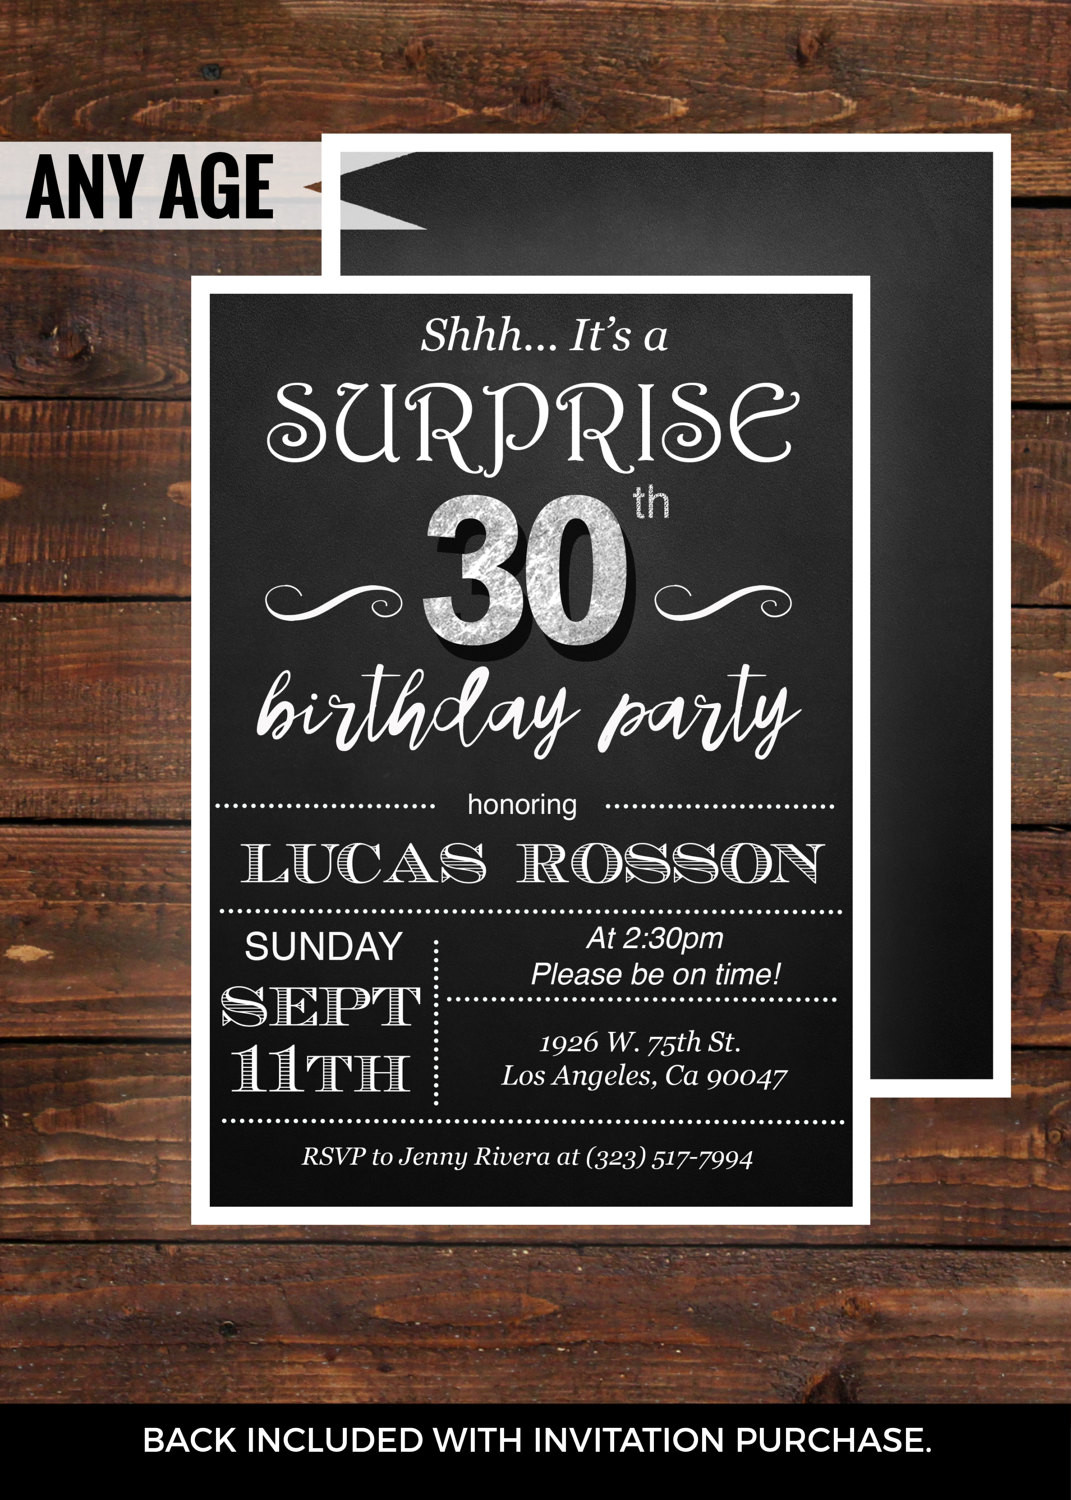 Surprise 30th Birthday Party Invitations
 Surprise 30th birthday invitations for him by